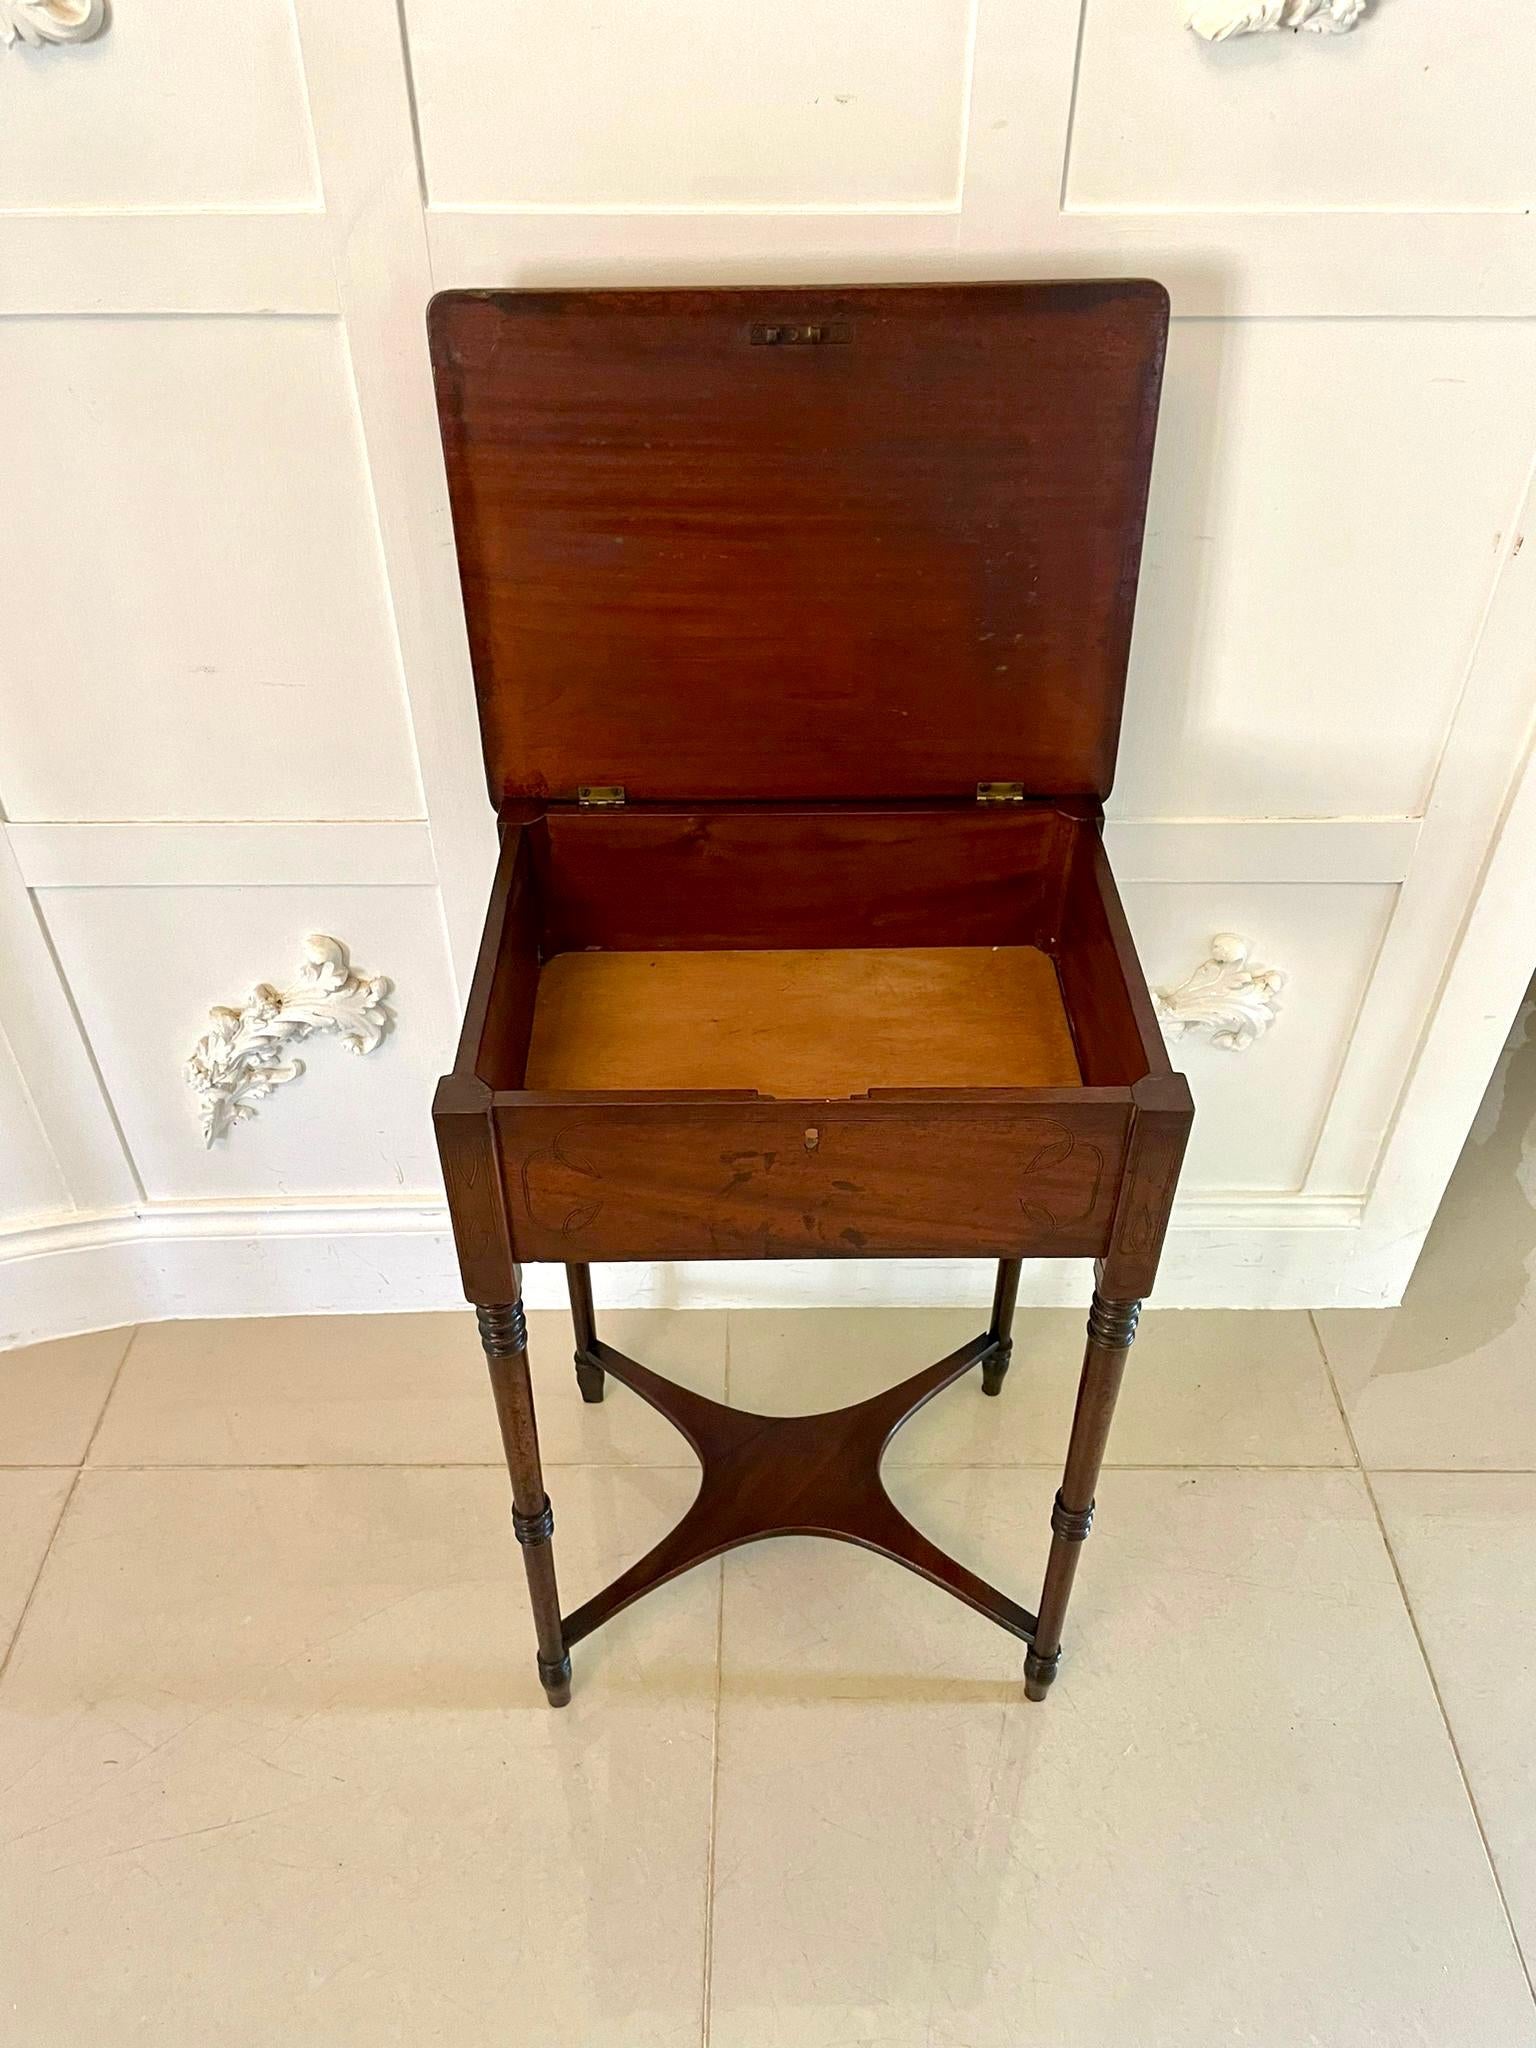 Antique Regency Freestanding Quality Mahogany Inlaid Lamp Table  In Good Condition For Sale In Suffolk, GB